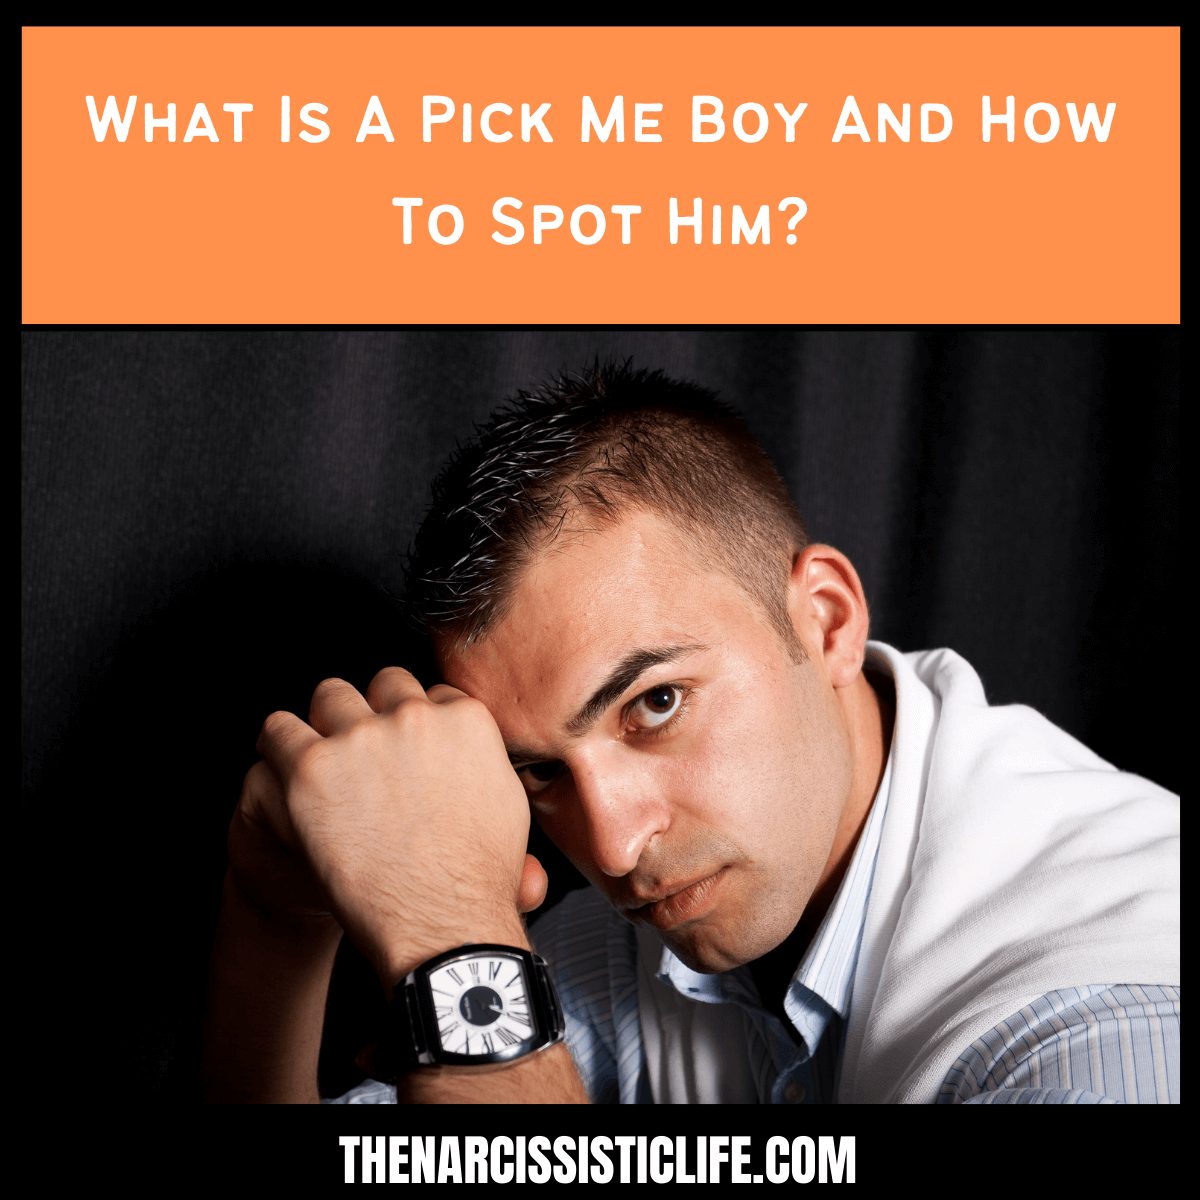 What Is A Pick Me Boy And How To Spot Him?